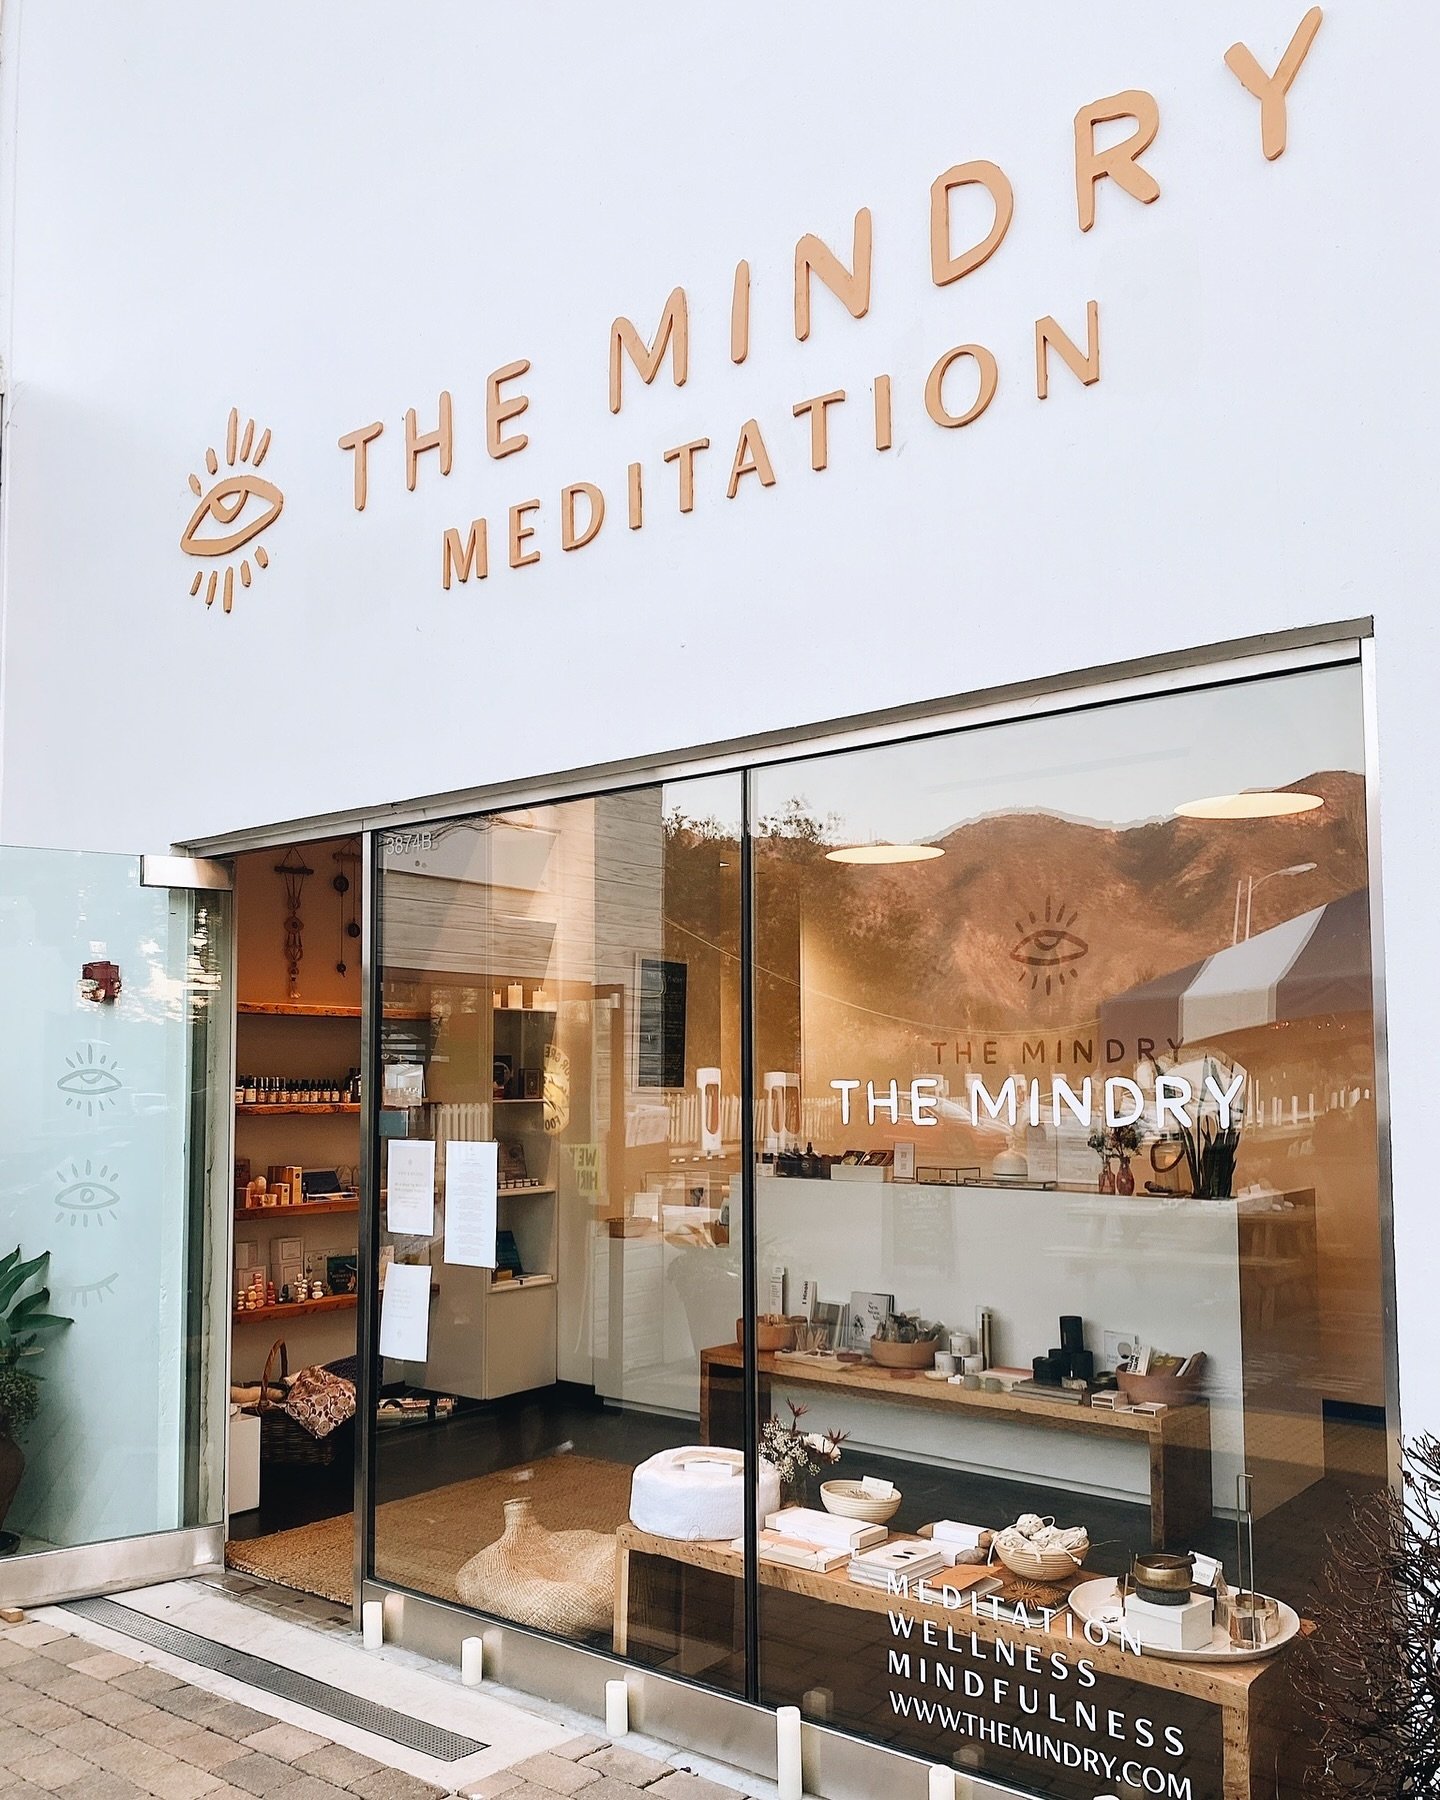 I&rsquo;m so grateful to share that my Ros&eacute; body scrub will be available at this such a lovely place @themindry @theminsdry located in a beautiful place, Malibu☺️🌊🌙 

Meditation - Wellness - Mindfulness, I admire all their practices &amp; am